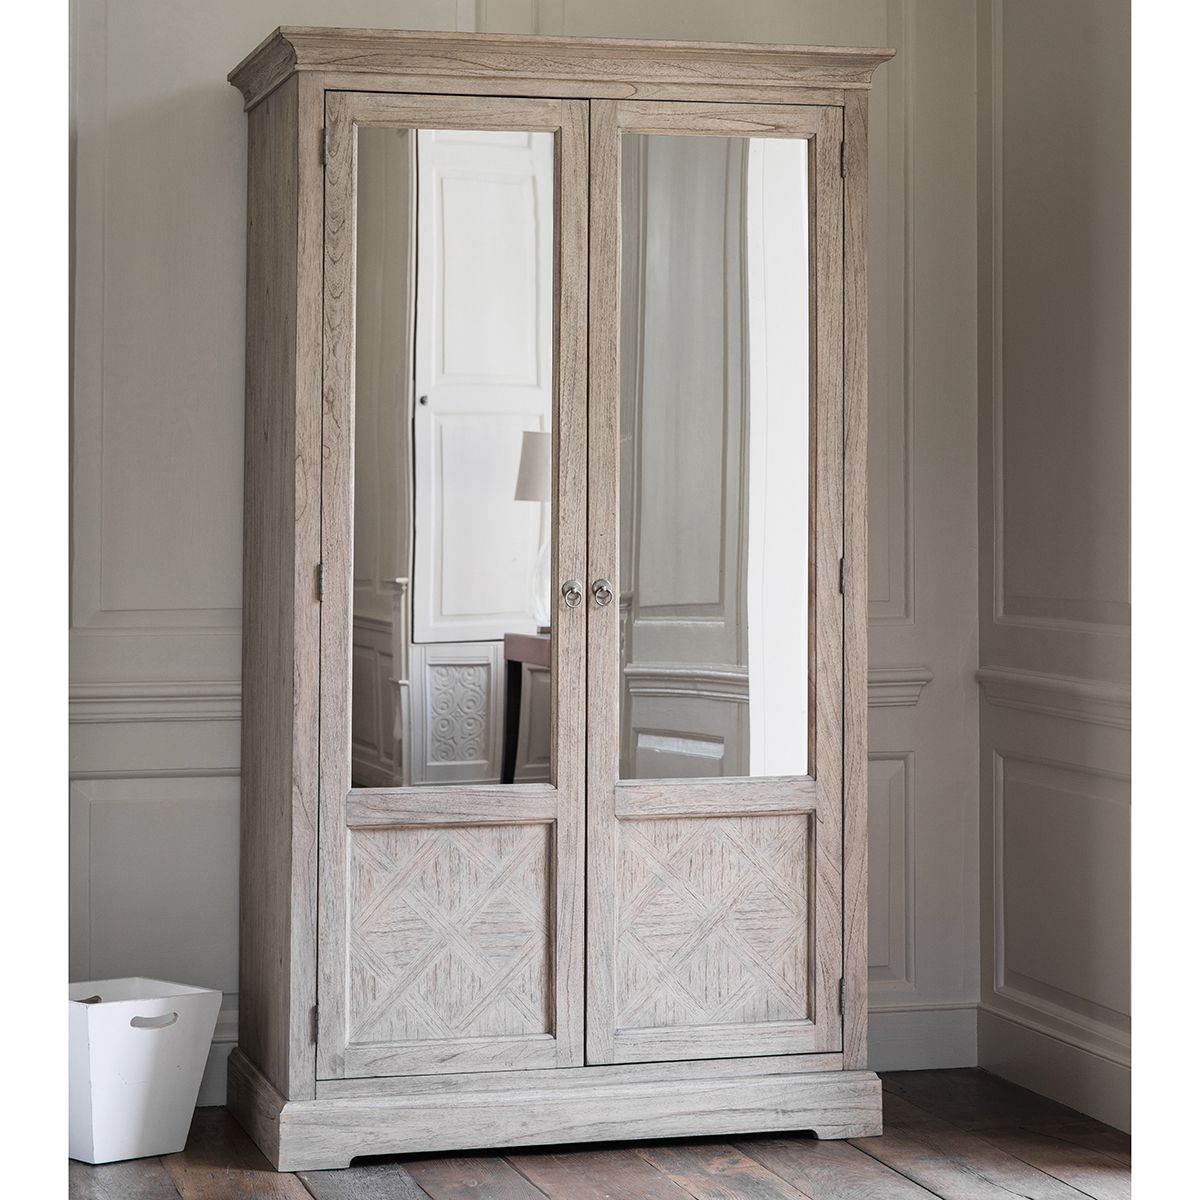 Camille French Style Double Wardrobe, Washed Oak | French Wardrobes |  French Bedroom Furniture Intended For Double Mirrored Wardrobes (Gallery 20 of 20)